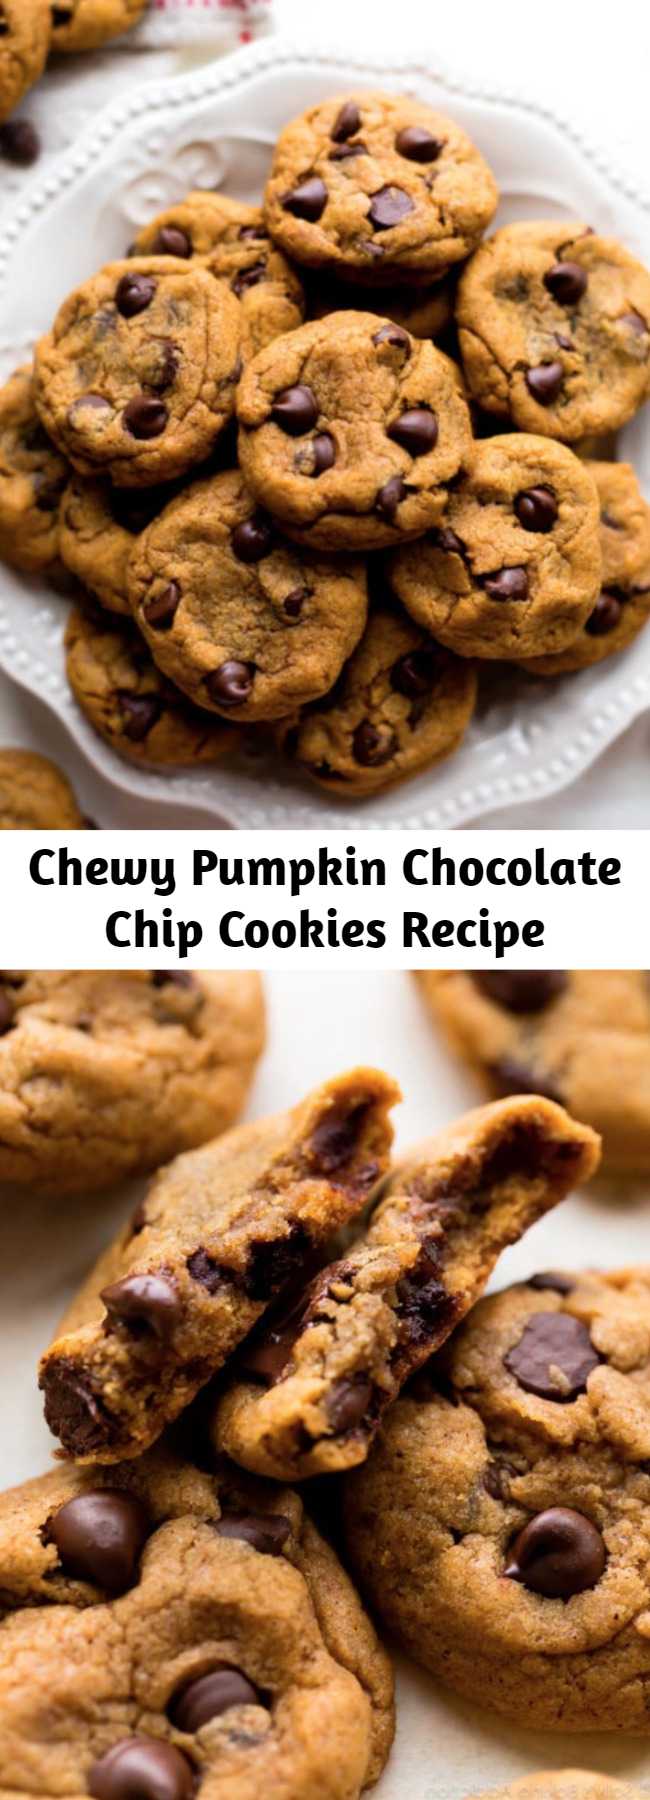 Chewy Pumpkin Chocolate Chip Cookies Recipe - I’m confident you’ll love these pumpkin chocolate chip cookies! Omitting the egg, using melted butter, and blotting the pumpkin guarantee a chewier texture.